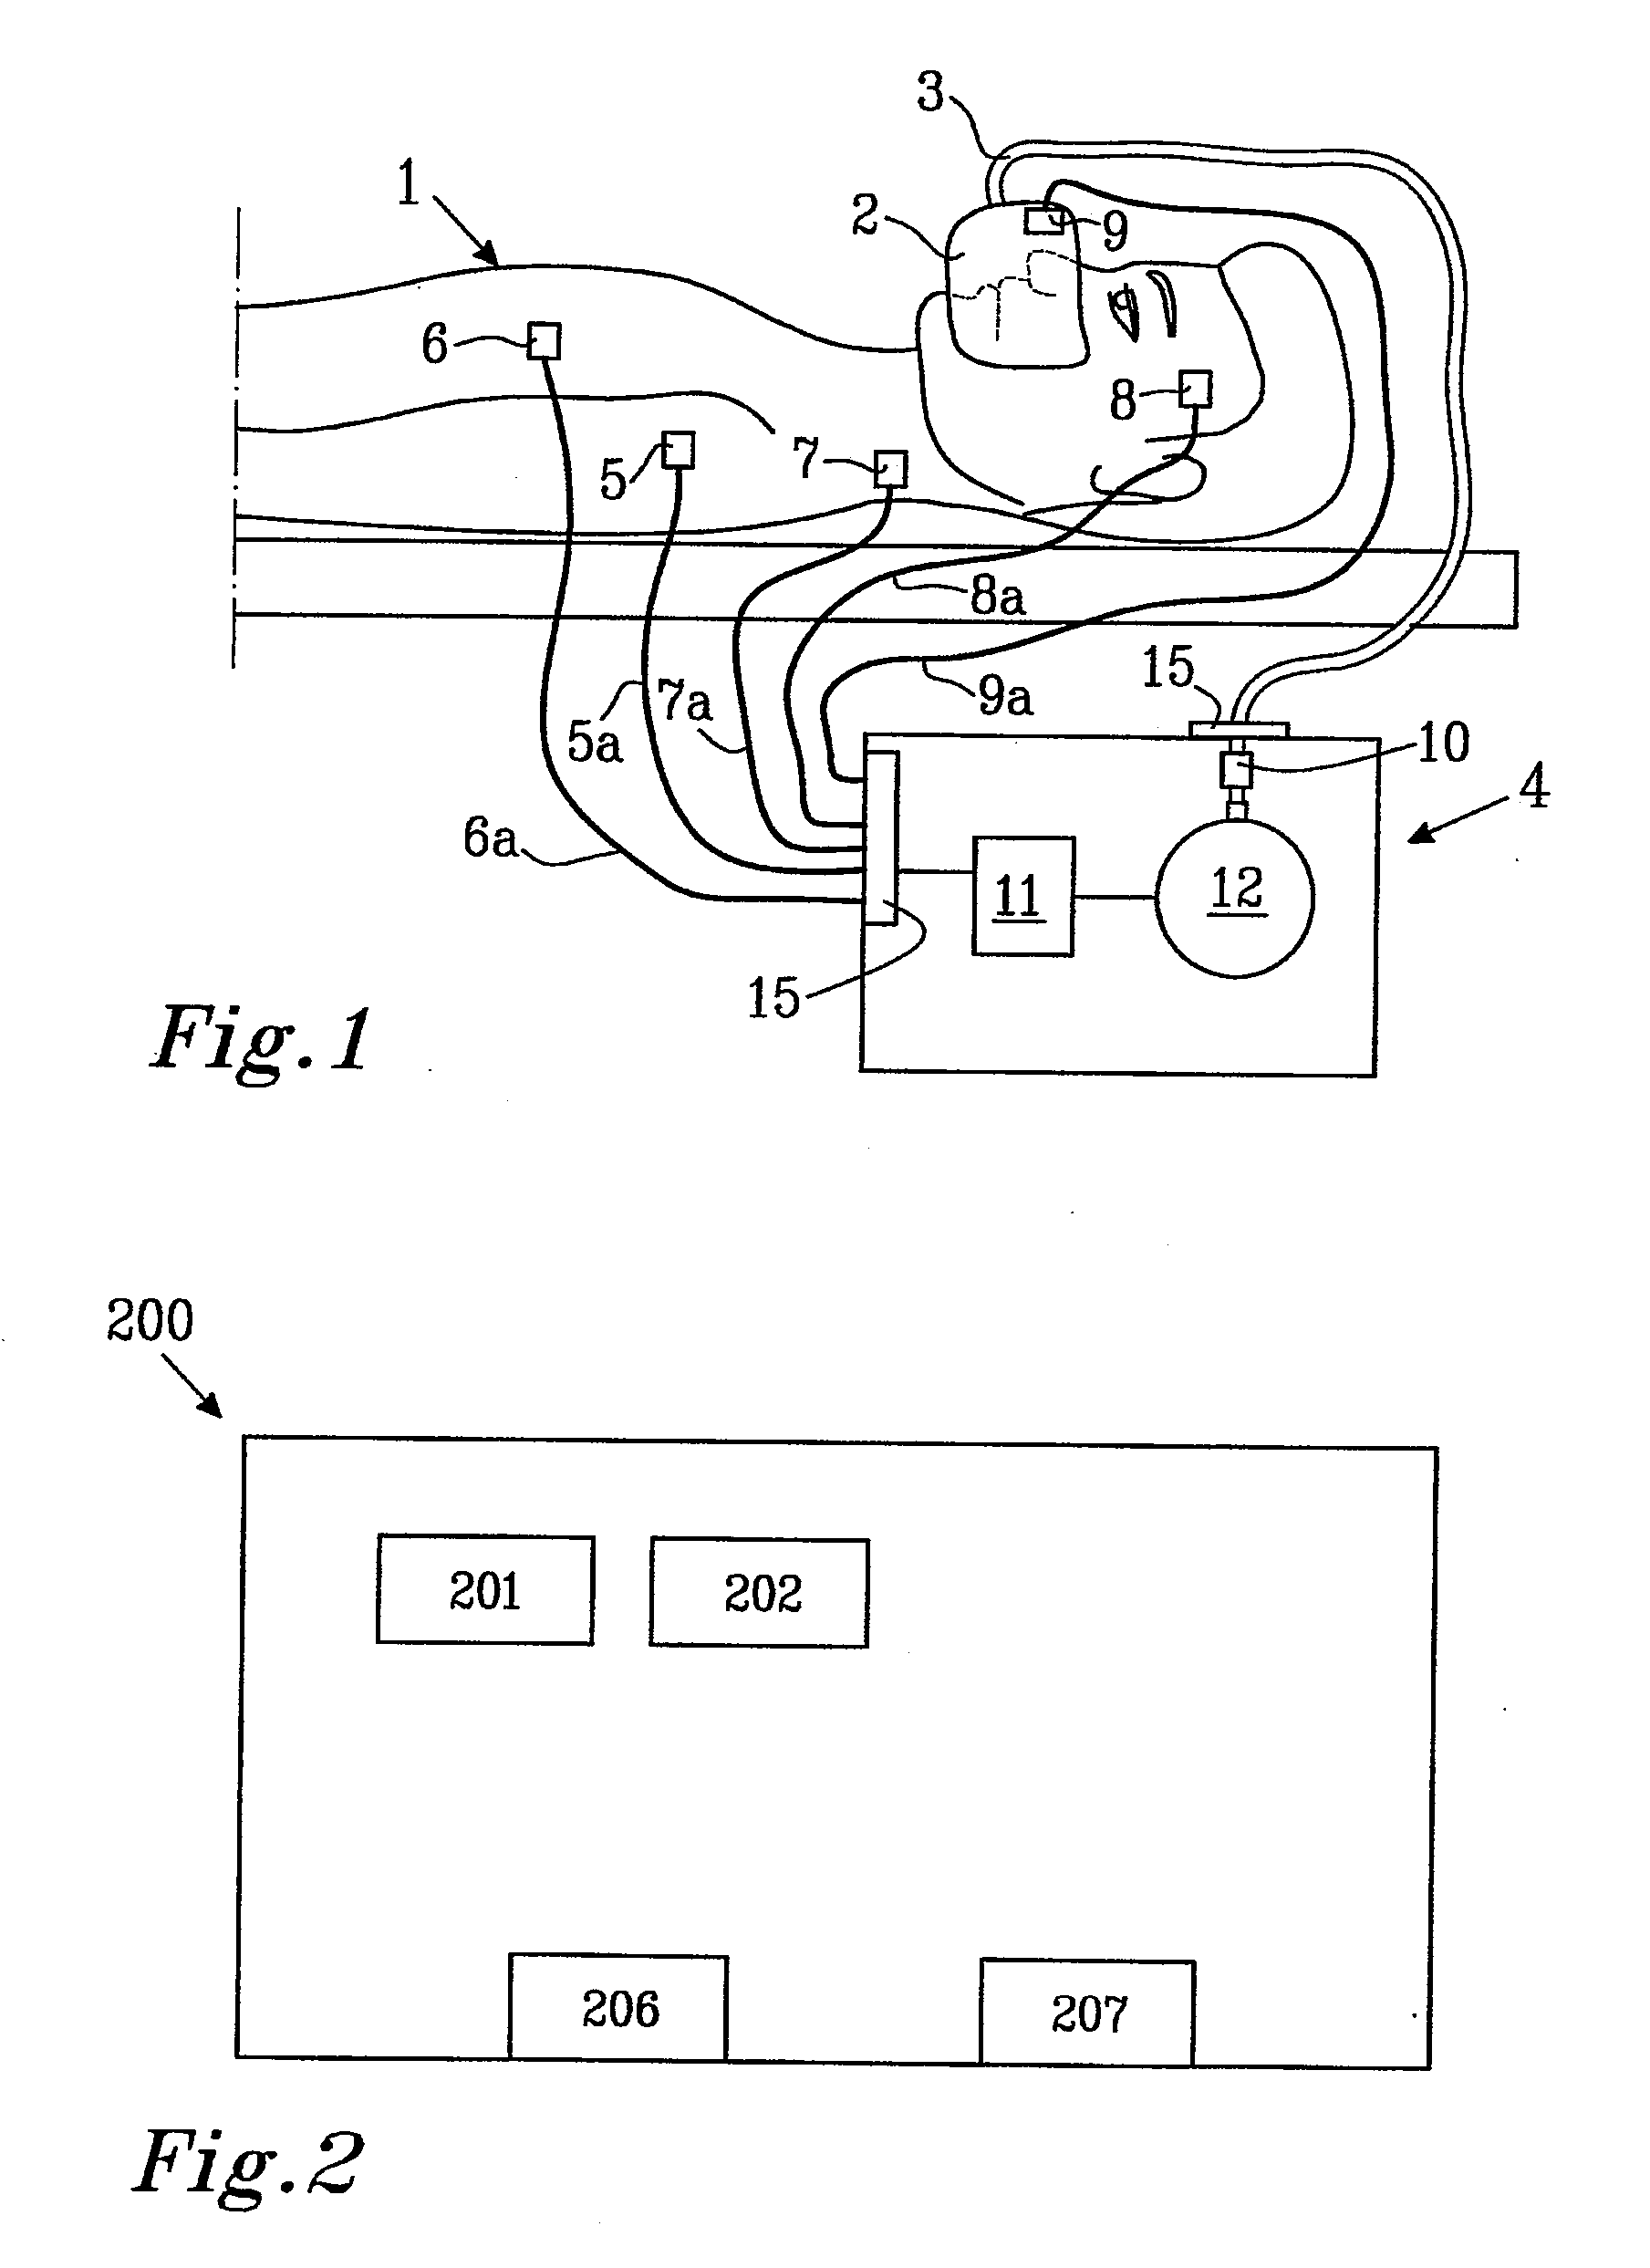 Energy relief control in a mechanical ventilator